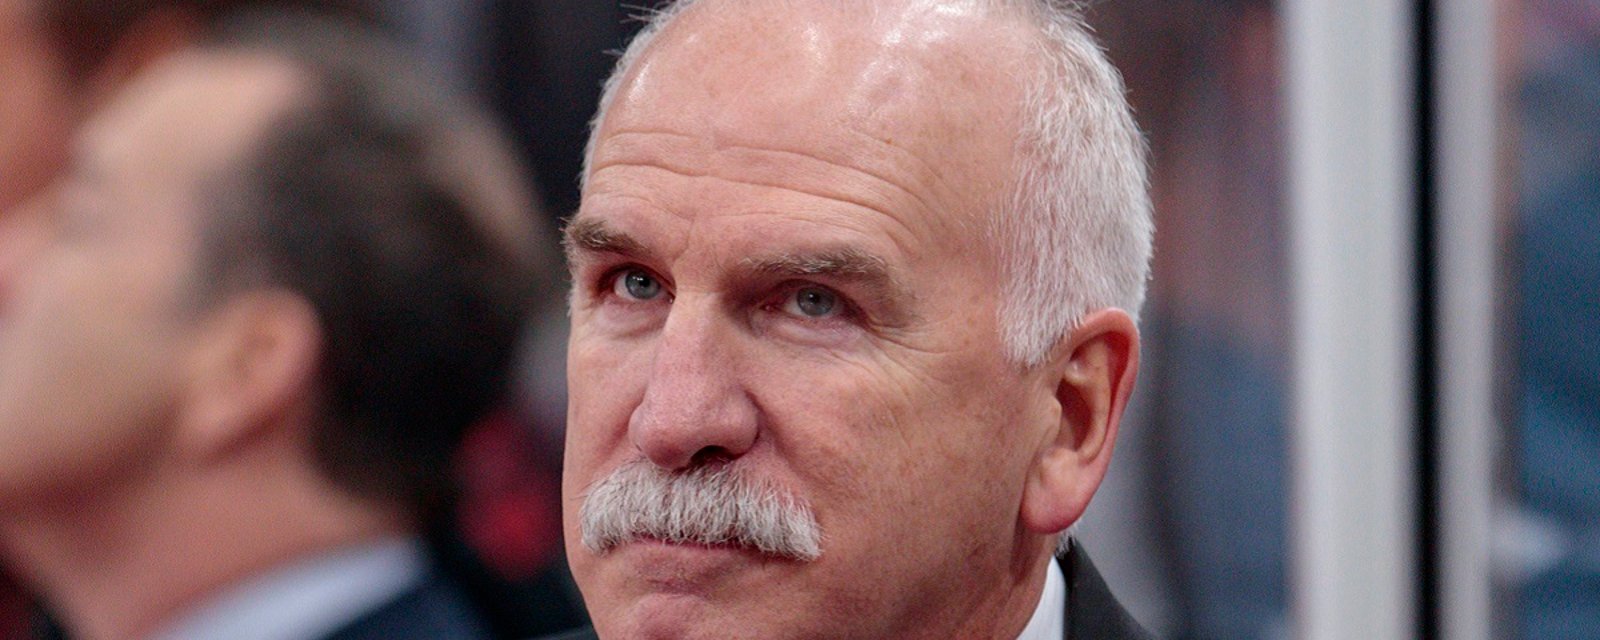 Quenneville opens up about being fired, and discusses what comes next.